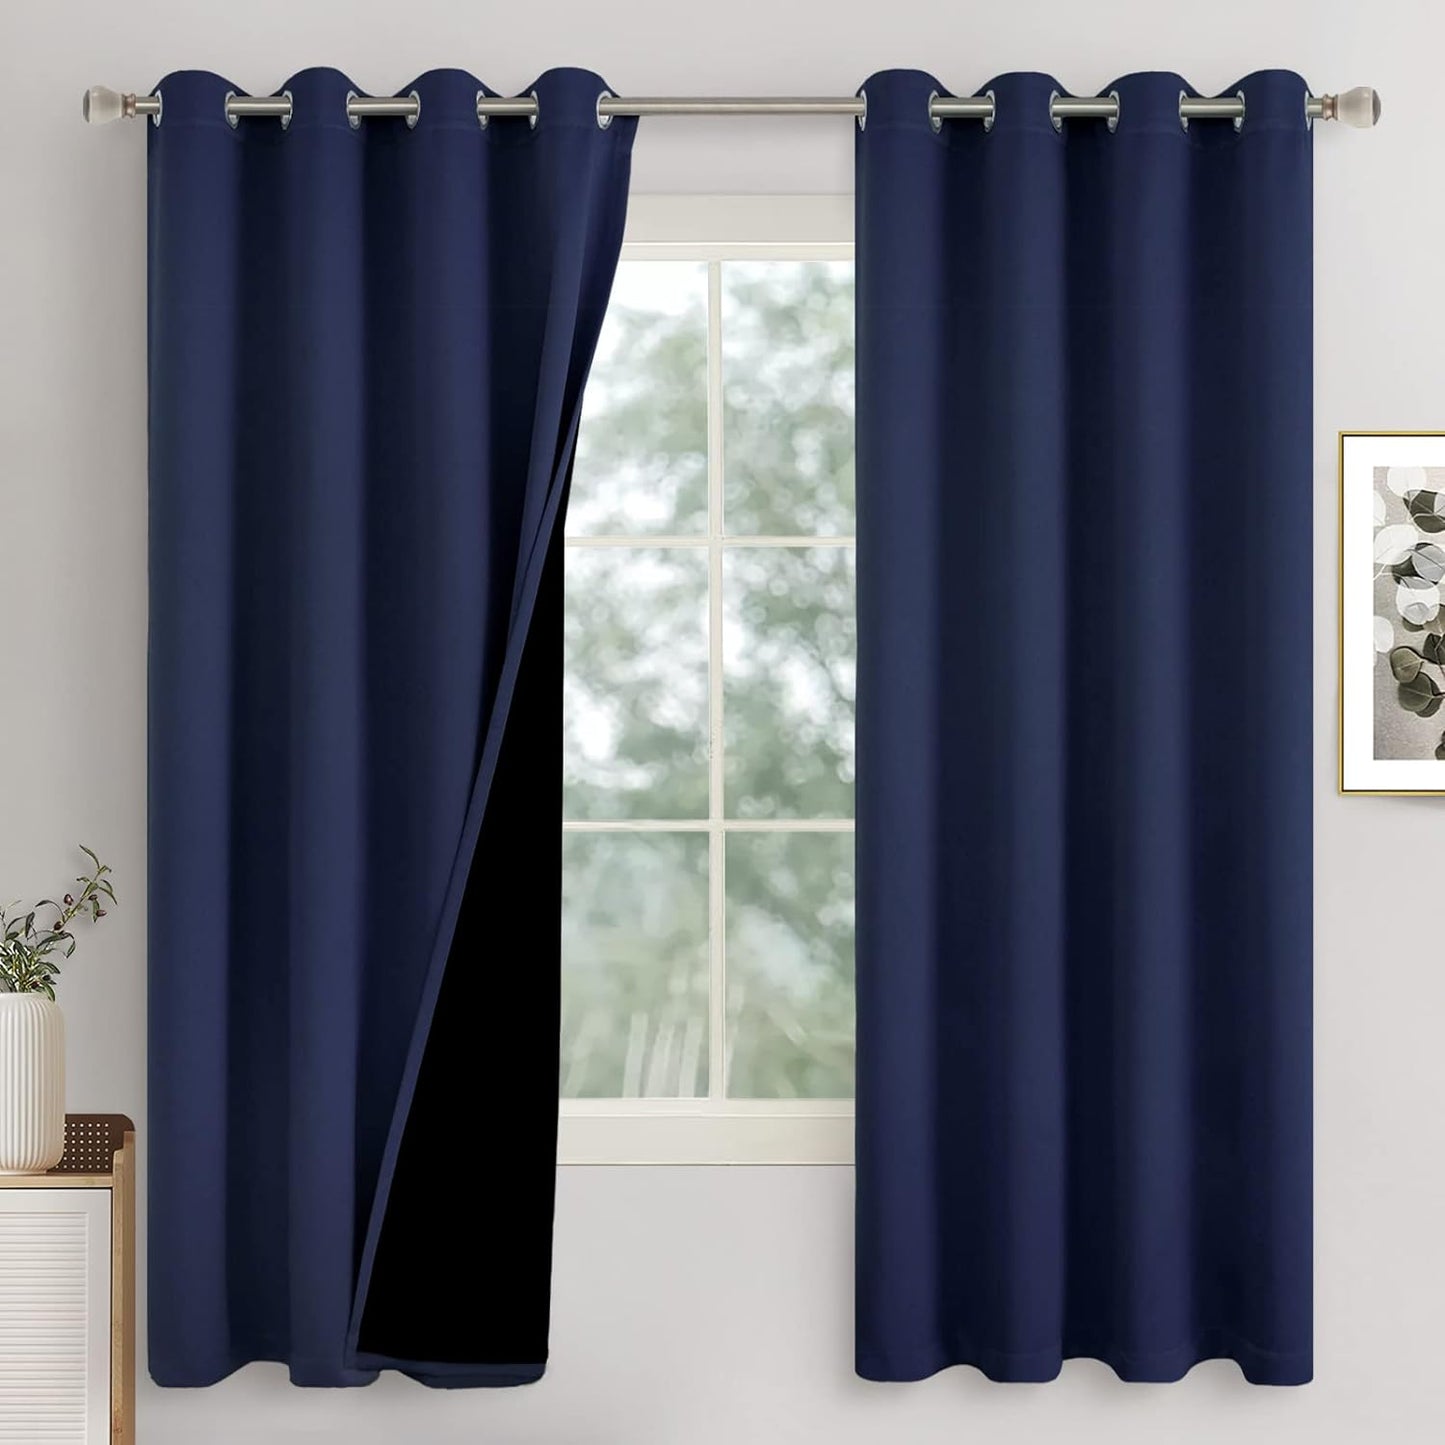 QUEMAS Short Blackout Curtains 54 Inch Length 2 Panels, 100% Light Blocking Thermal Insulated Soundproof Grommet Small Window Curtains for Bedroom Basement with Black Liner, Each 42 Inch Wide, White  QUEMAS Navy Blue + Black Lining W52 X L63 